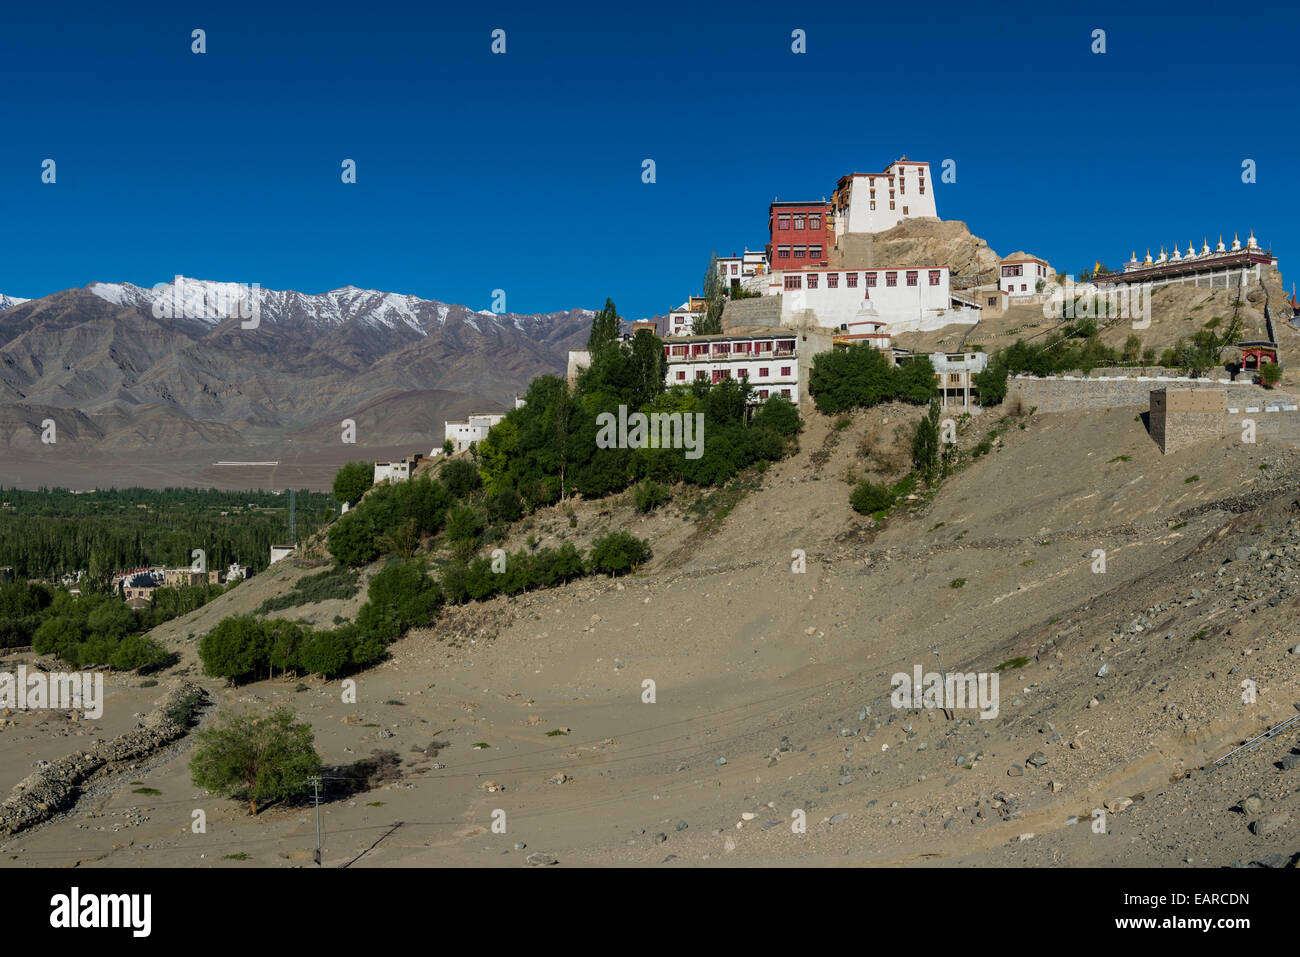 Thiksey Gompa monastery, built on a hill above the Indus valley, Ladakh, Jammu and Kashmir, India Stock Photo